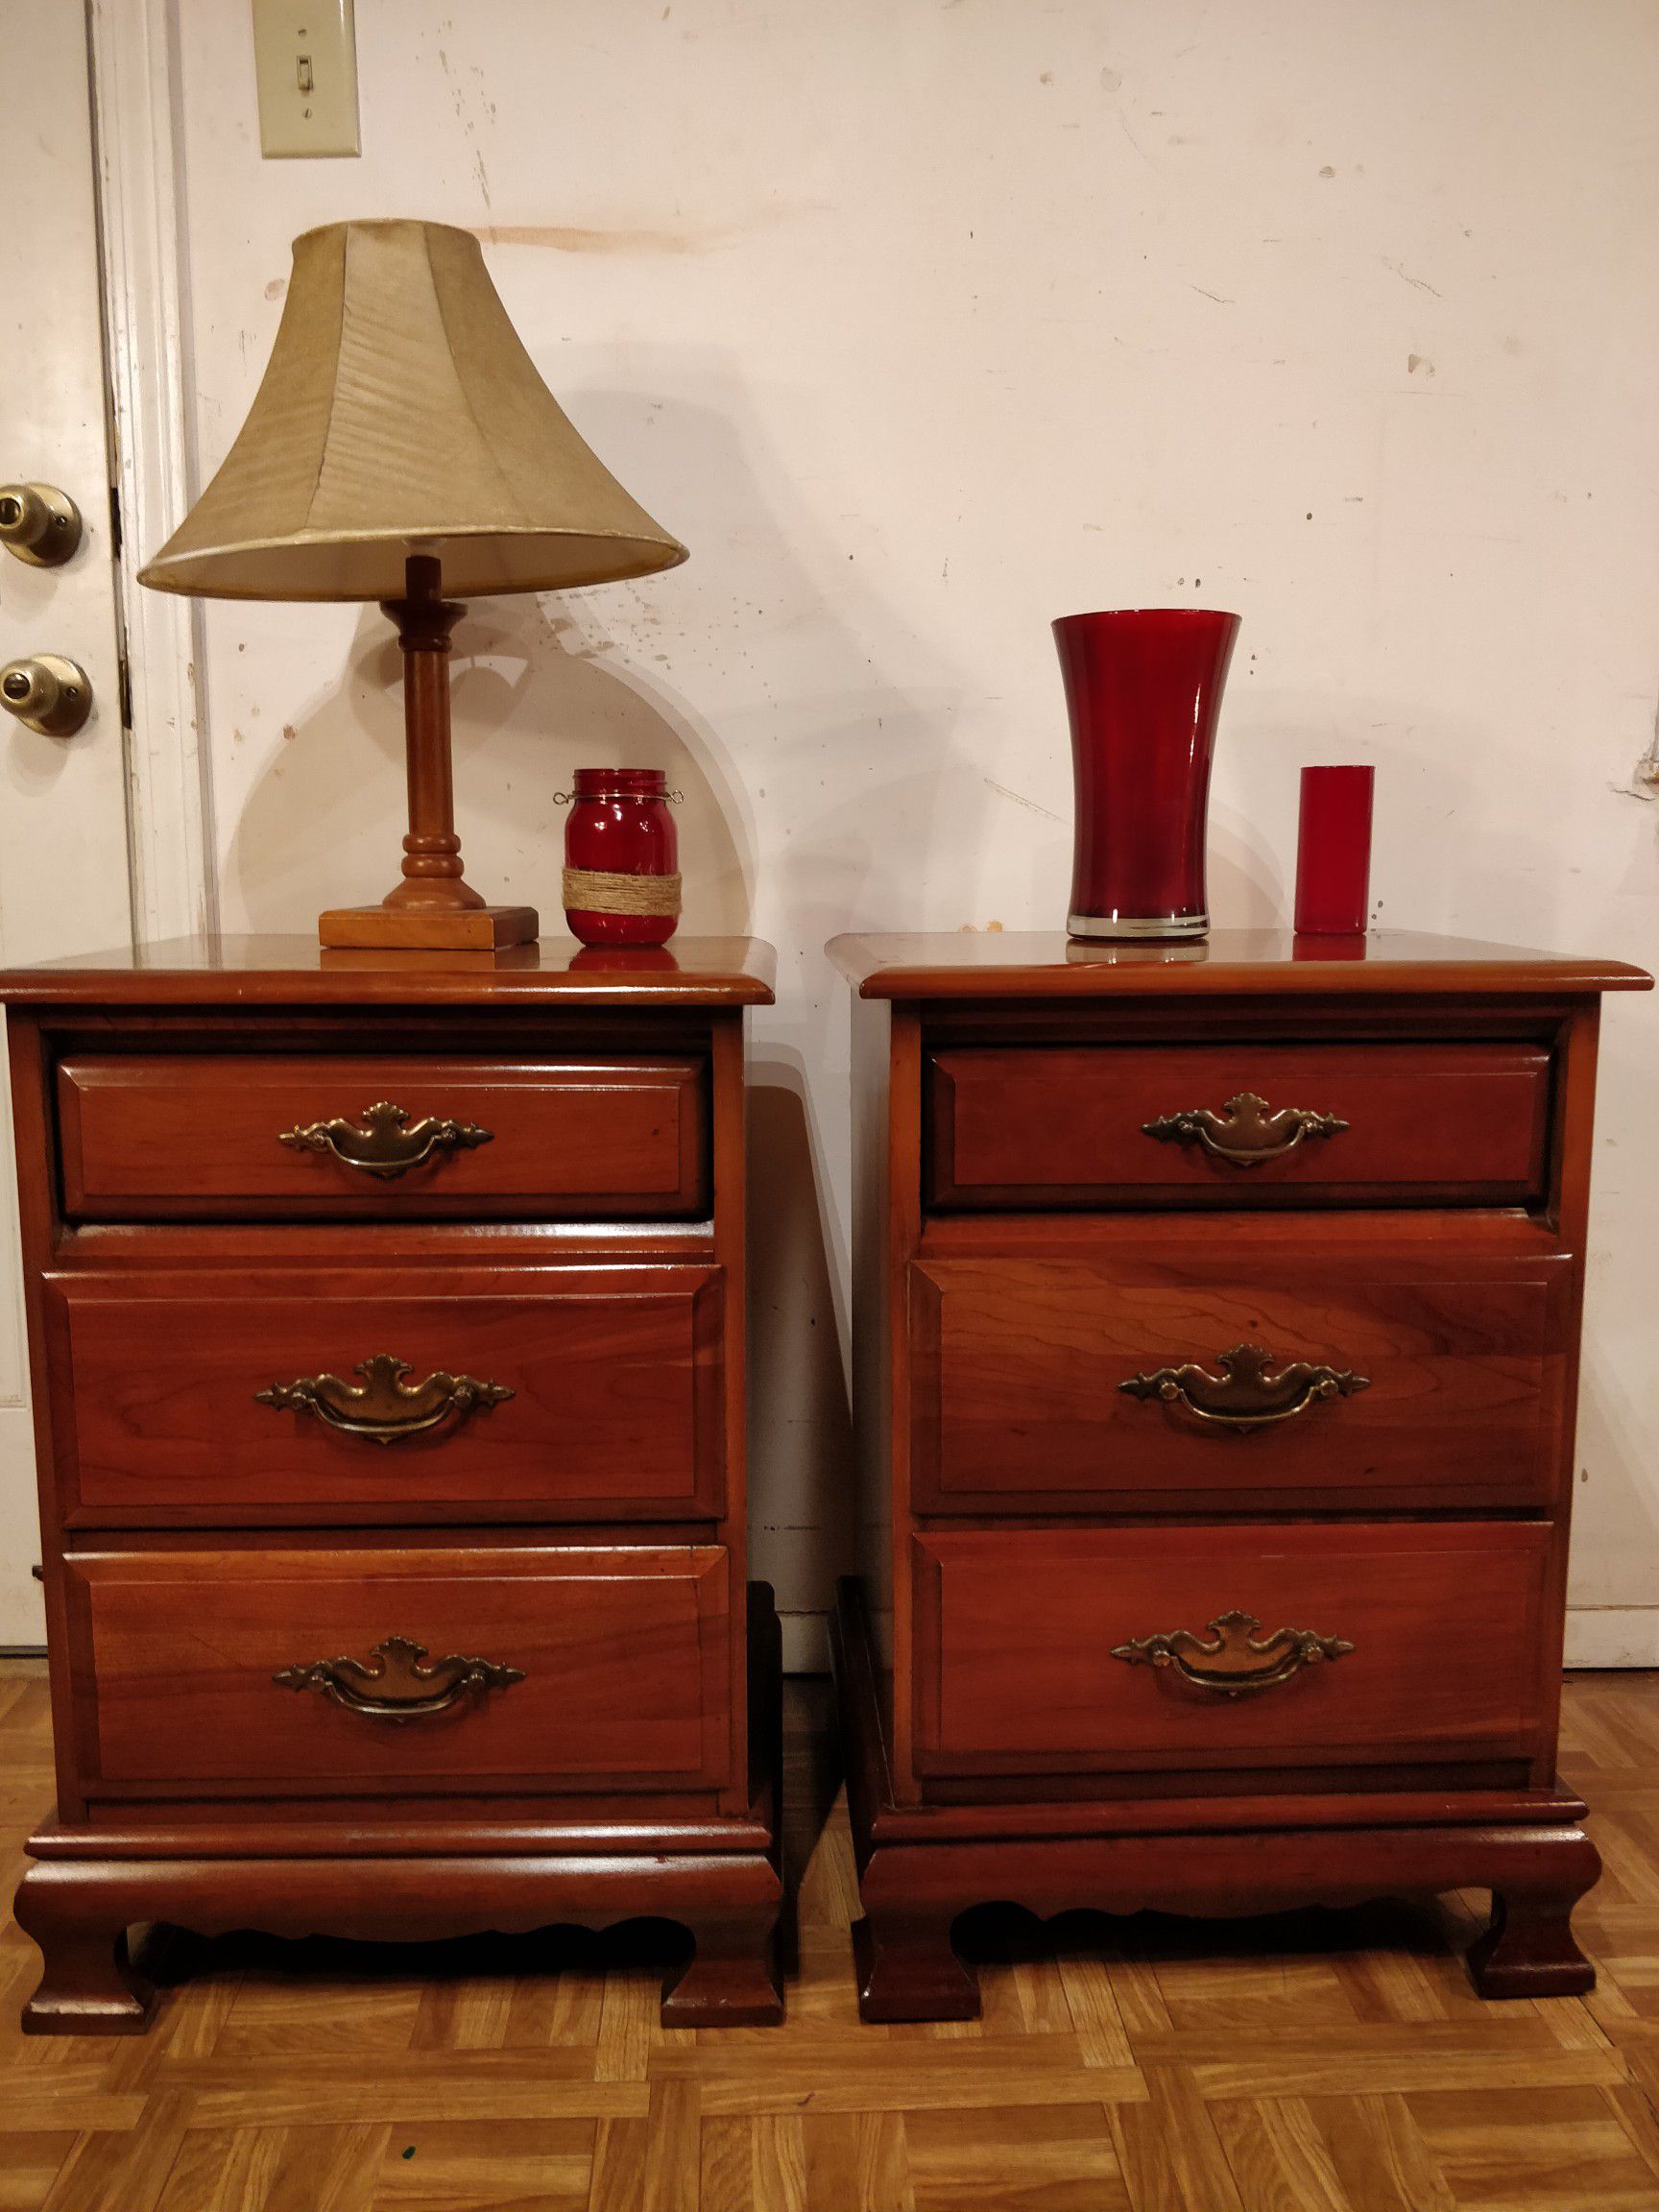 Solid wood 2 night stand with 3 drawers each in very good condition, all drawers sliding smoothly, pet free smoke free. L19"*W15.4"*H27"